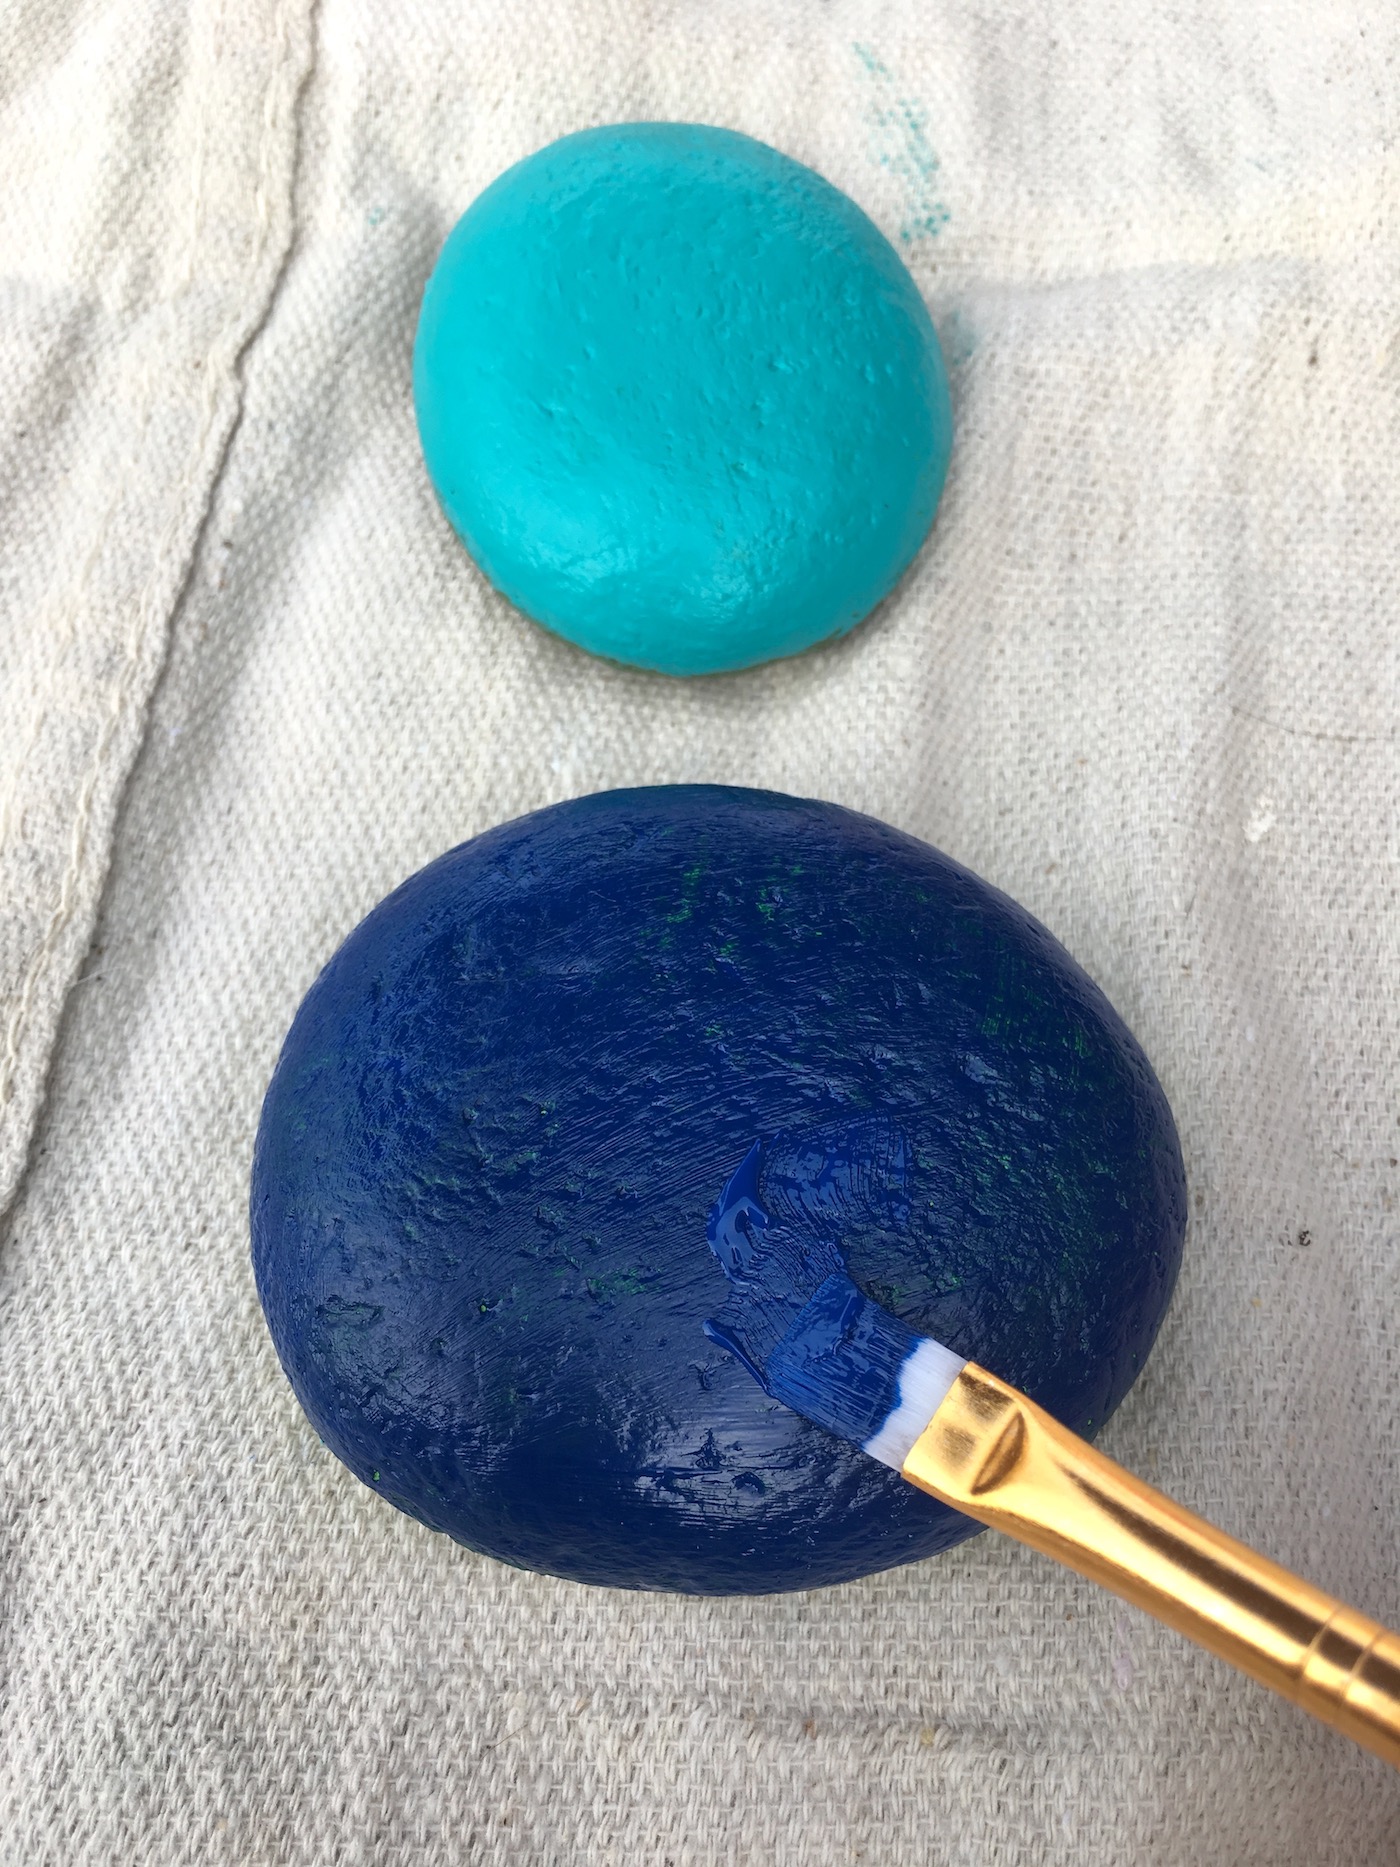 Painting stones in shades of blue and turquoise